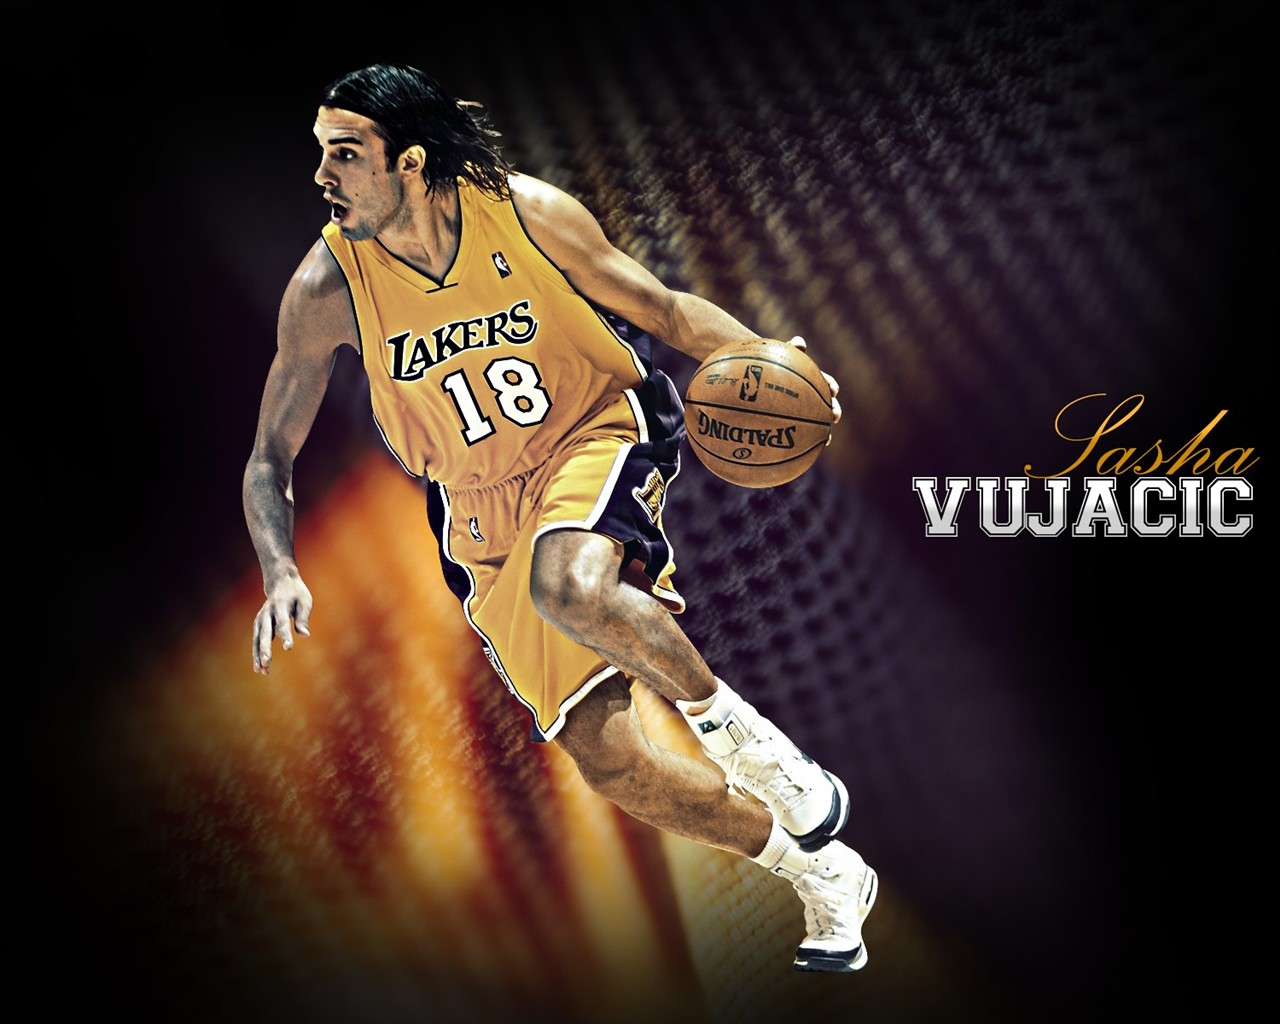 Los Angeles Lakers Wallpaper Oficial #22 - 1280x1024